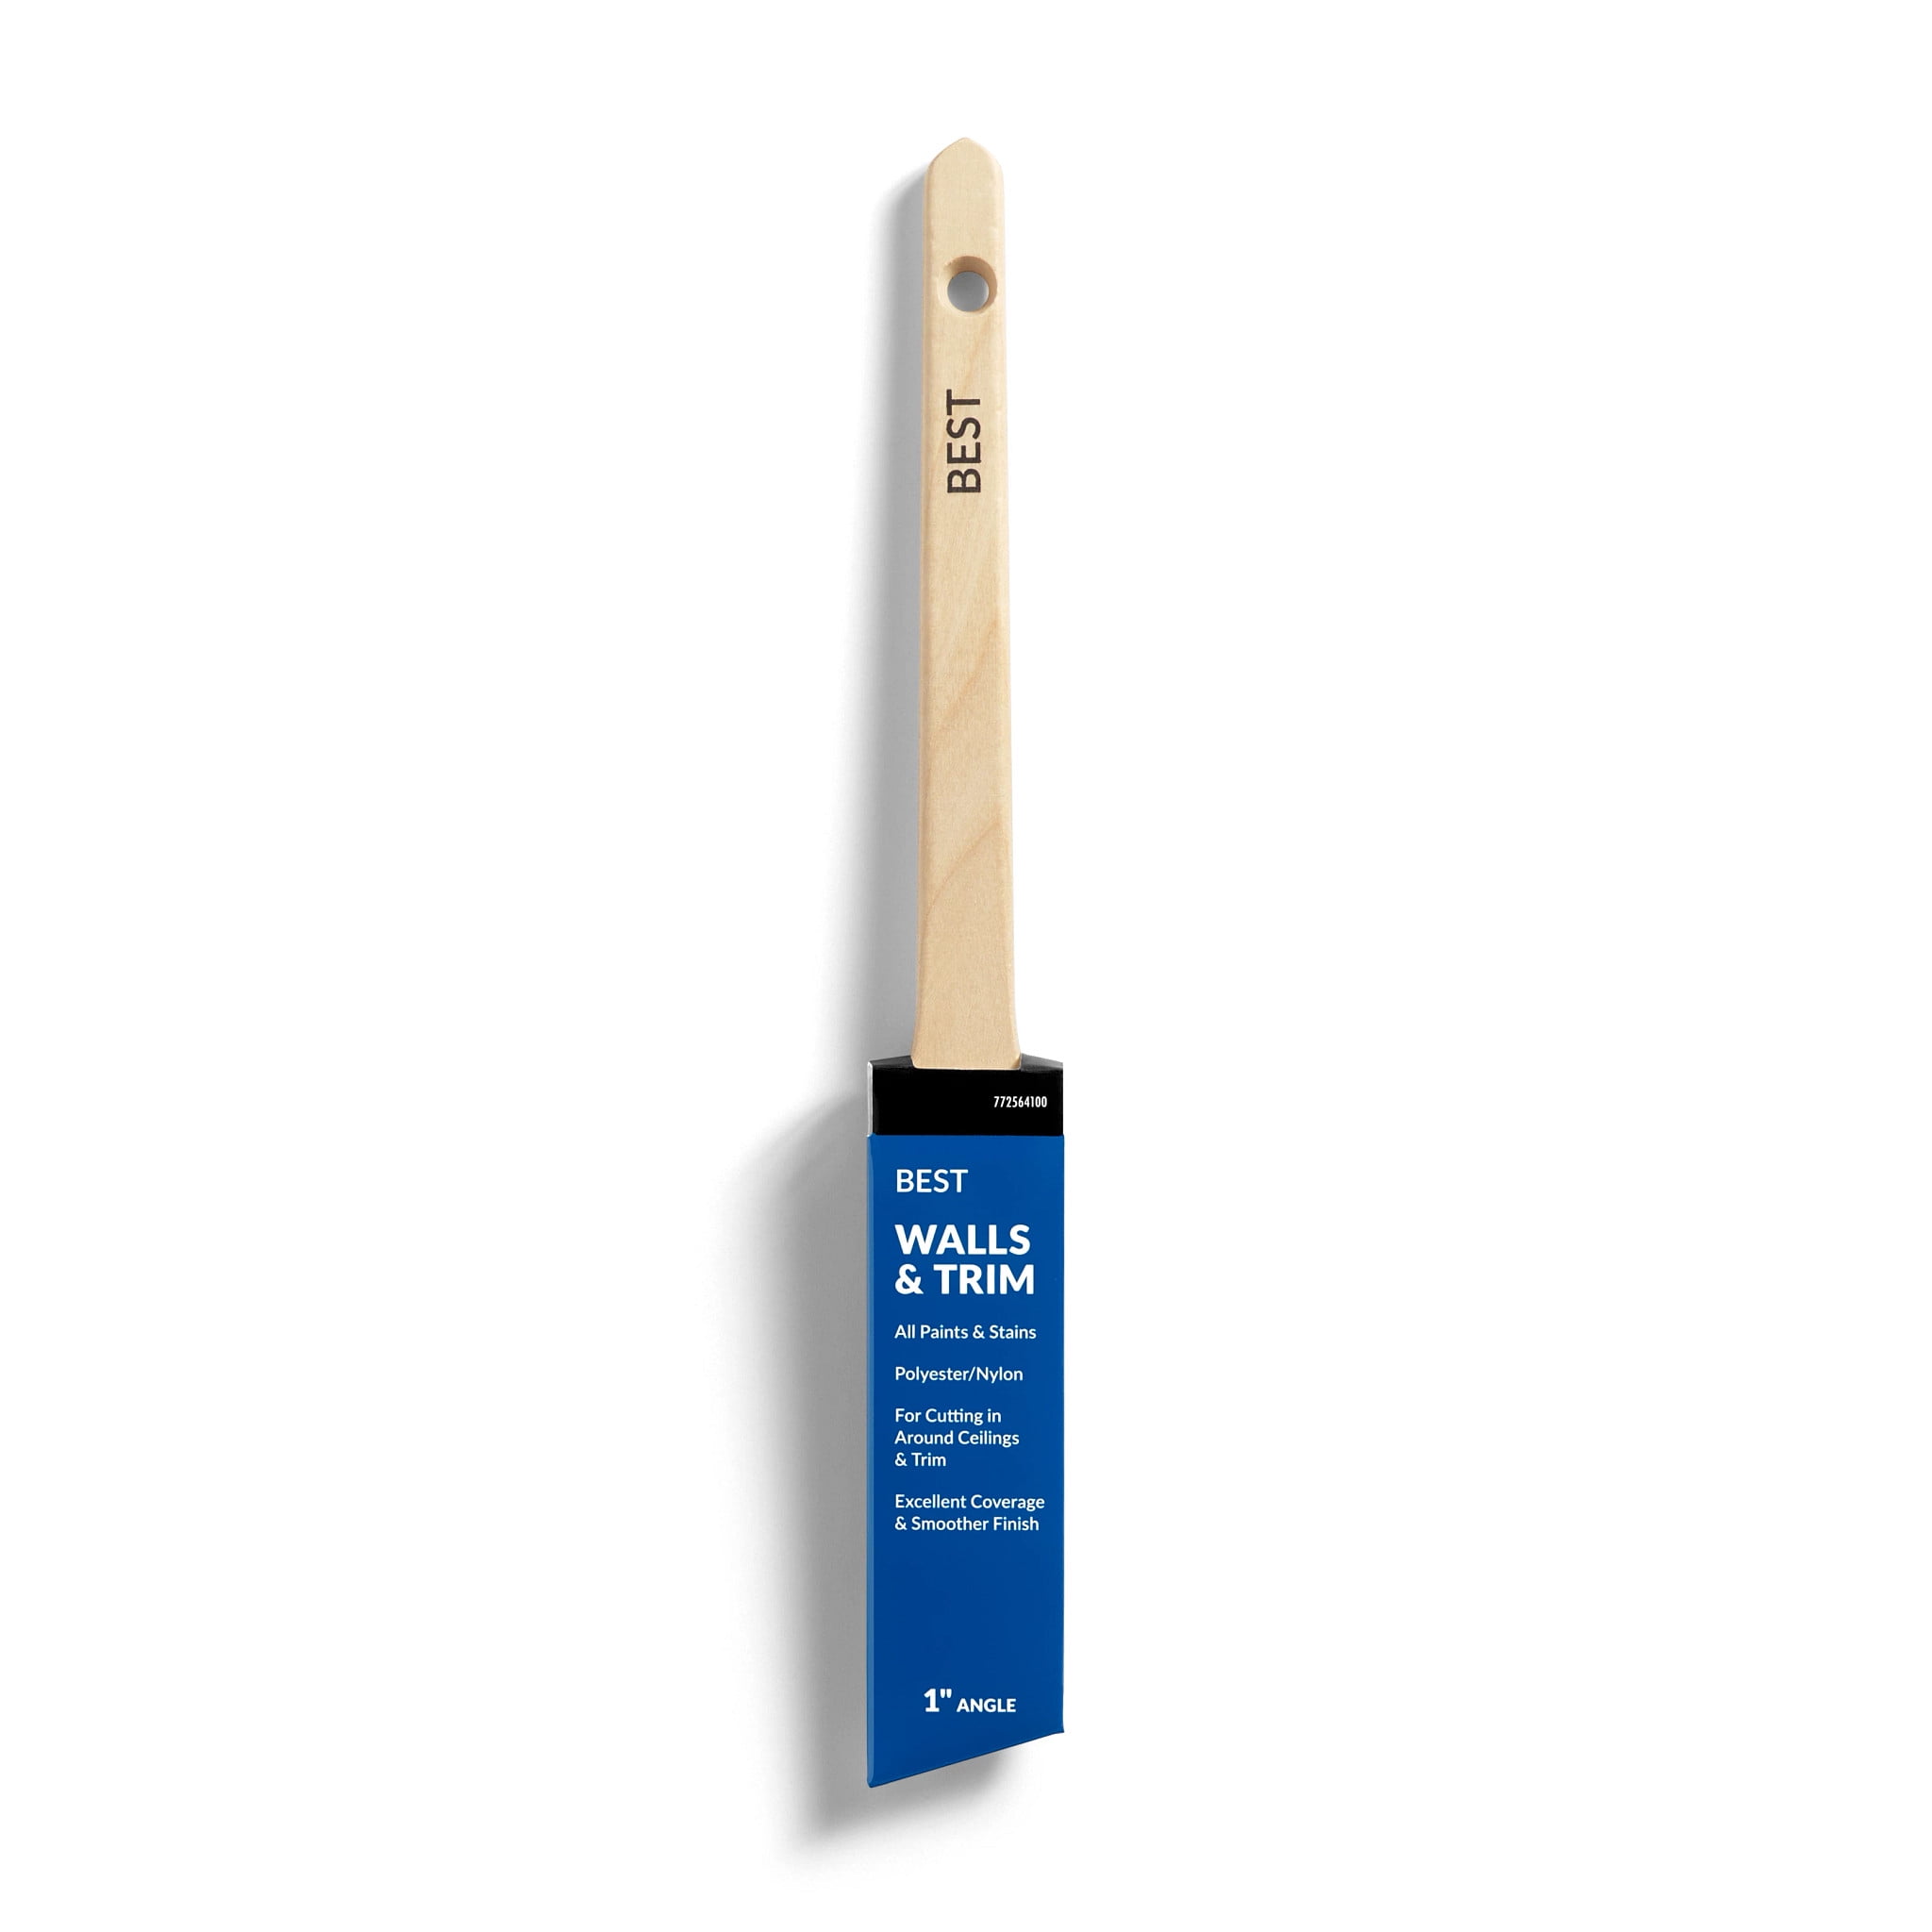 BEST Blended Bristle 1" inch Thin Angle Sash Paint Brush